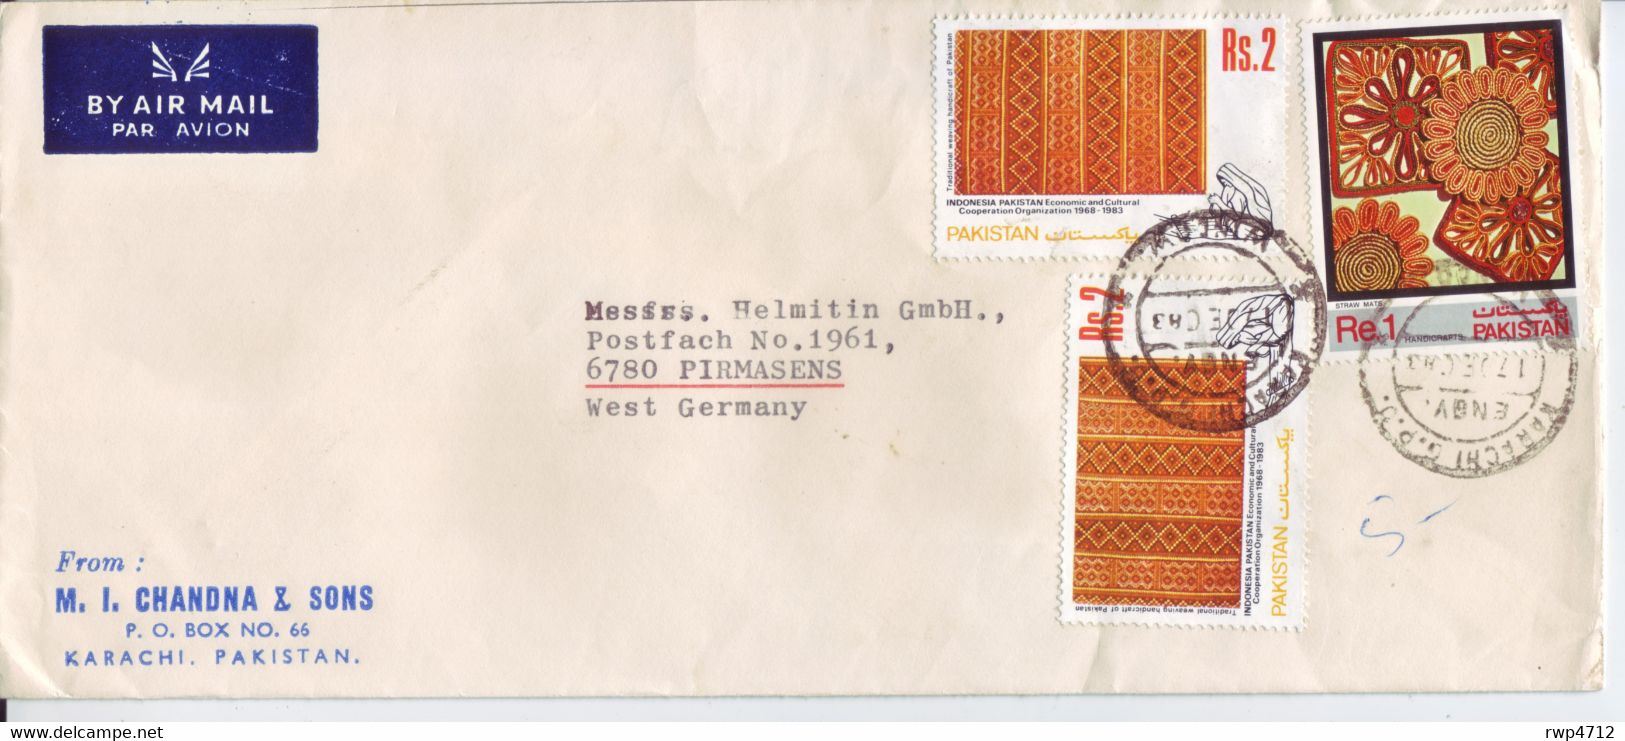 PAKISTAN Luftpostbrief  Airmail Cover  Lettre  1983 To Germany - Pakistan